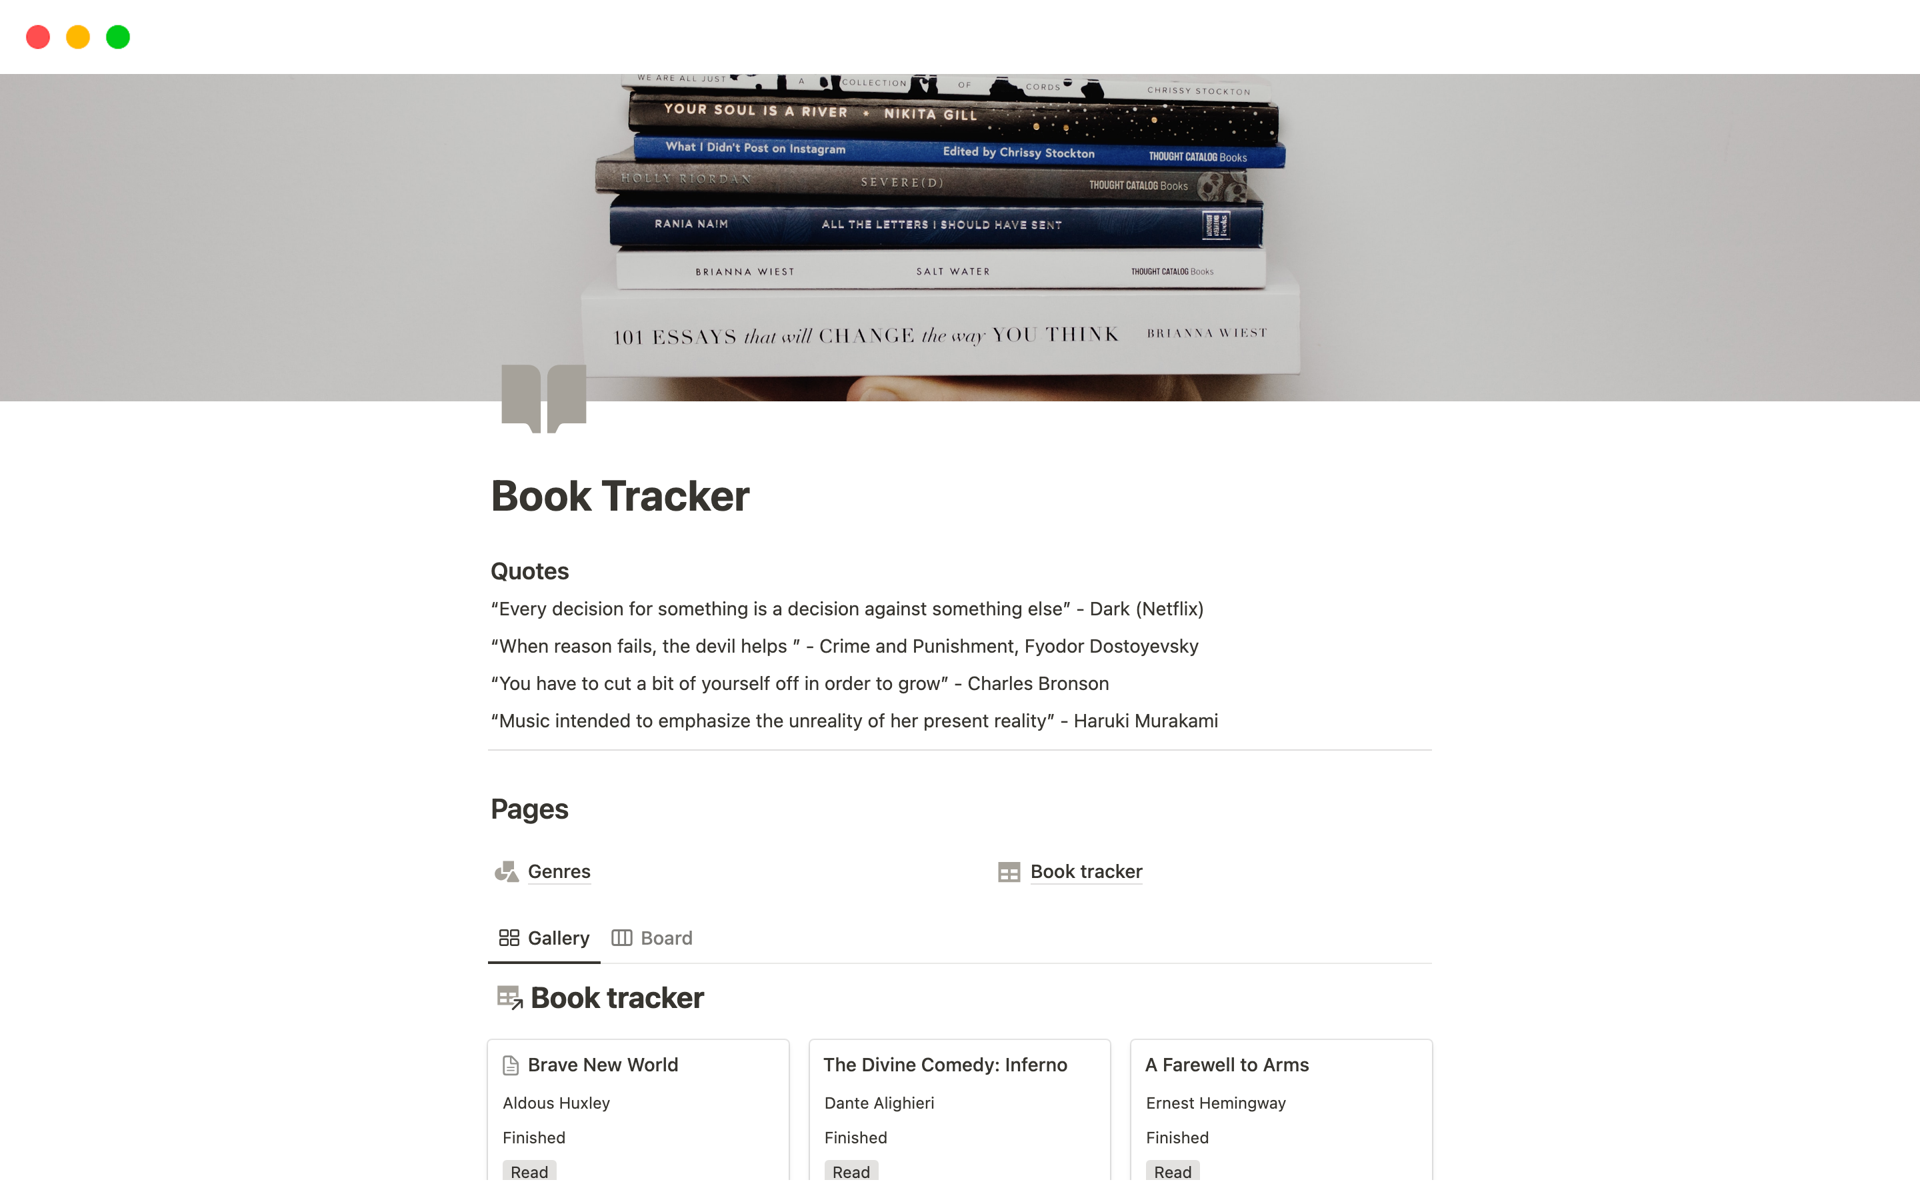 Keep your books and its notes or thoughts organised in this clean book tracker, providing a clean gallery view of your books and its genres.